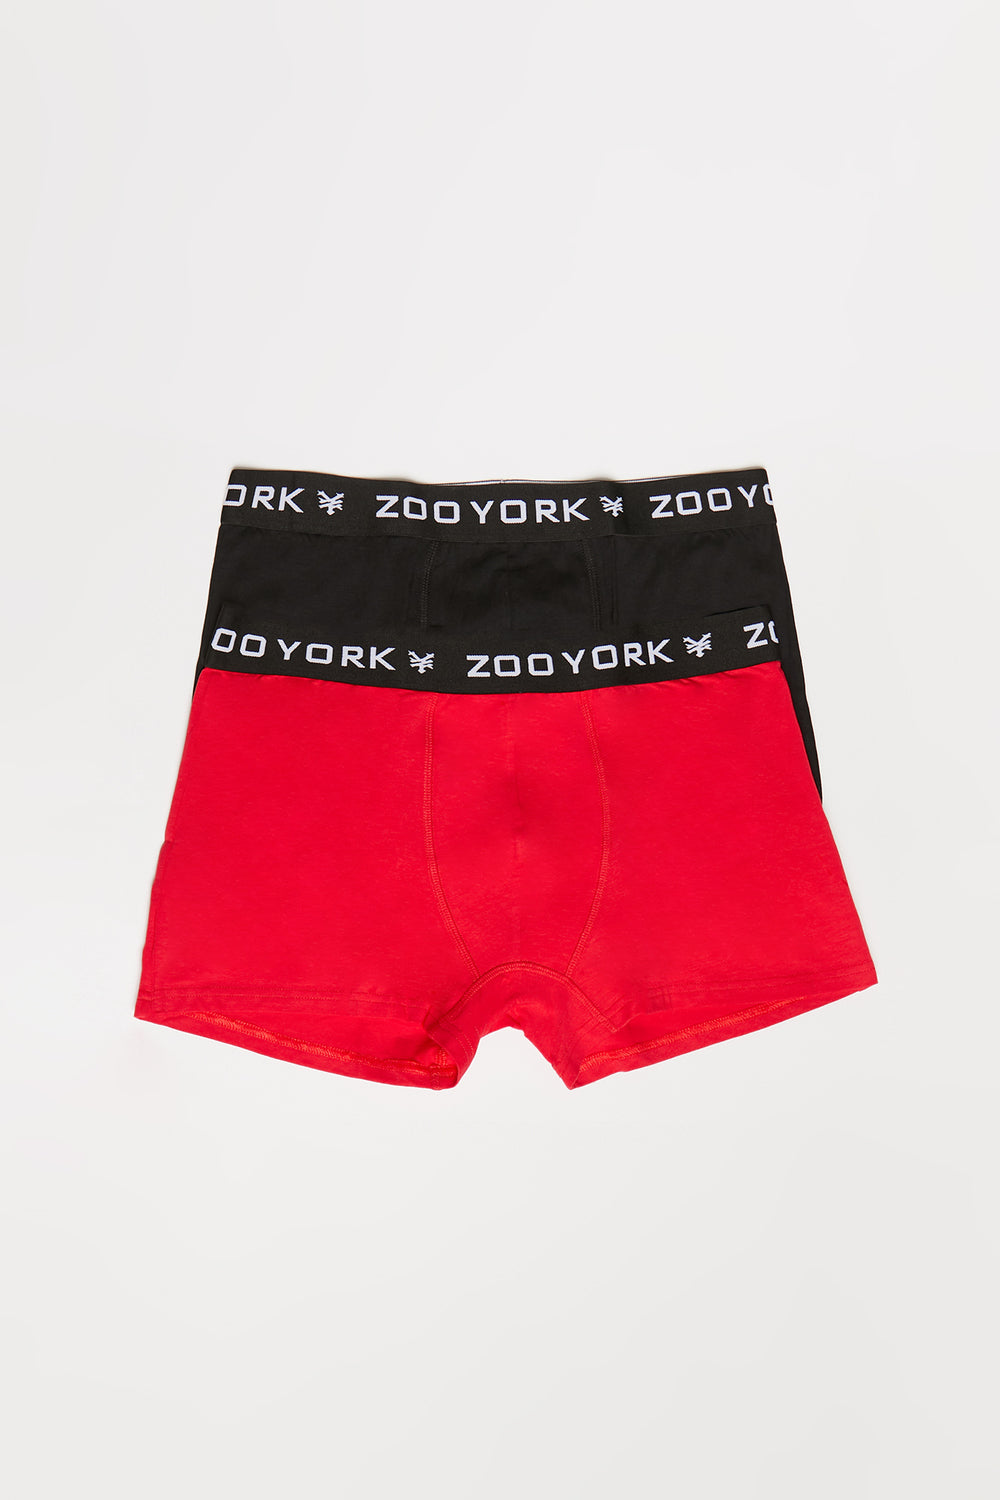 Zoo York Mens 2-Pack Boxer Briefs Red